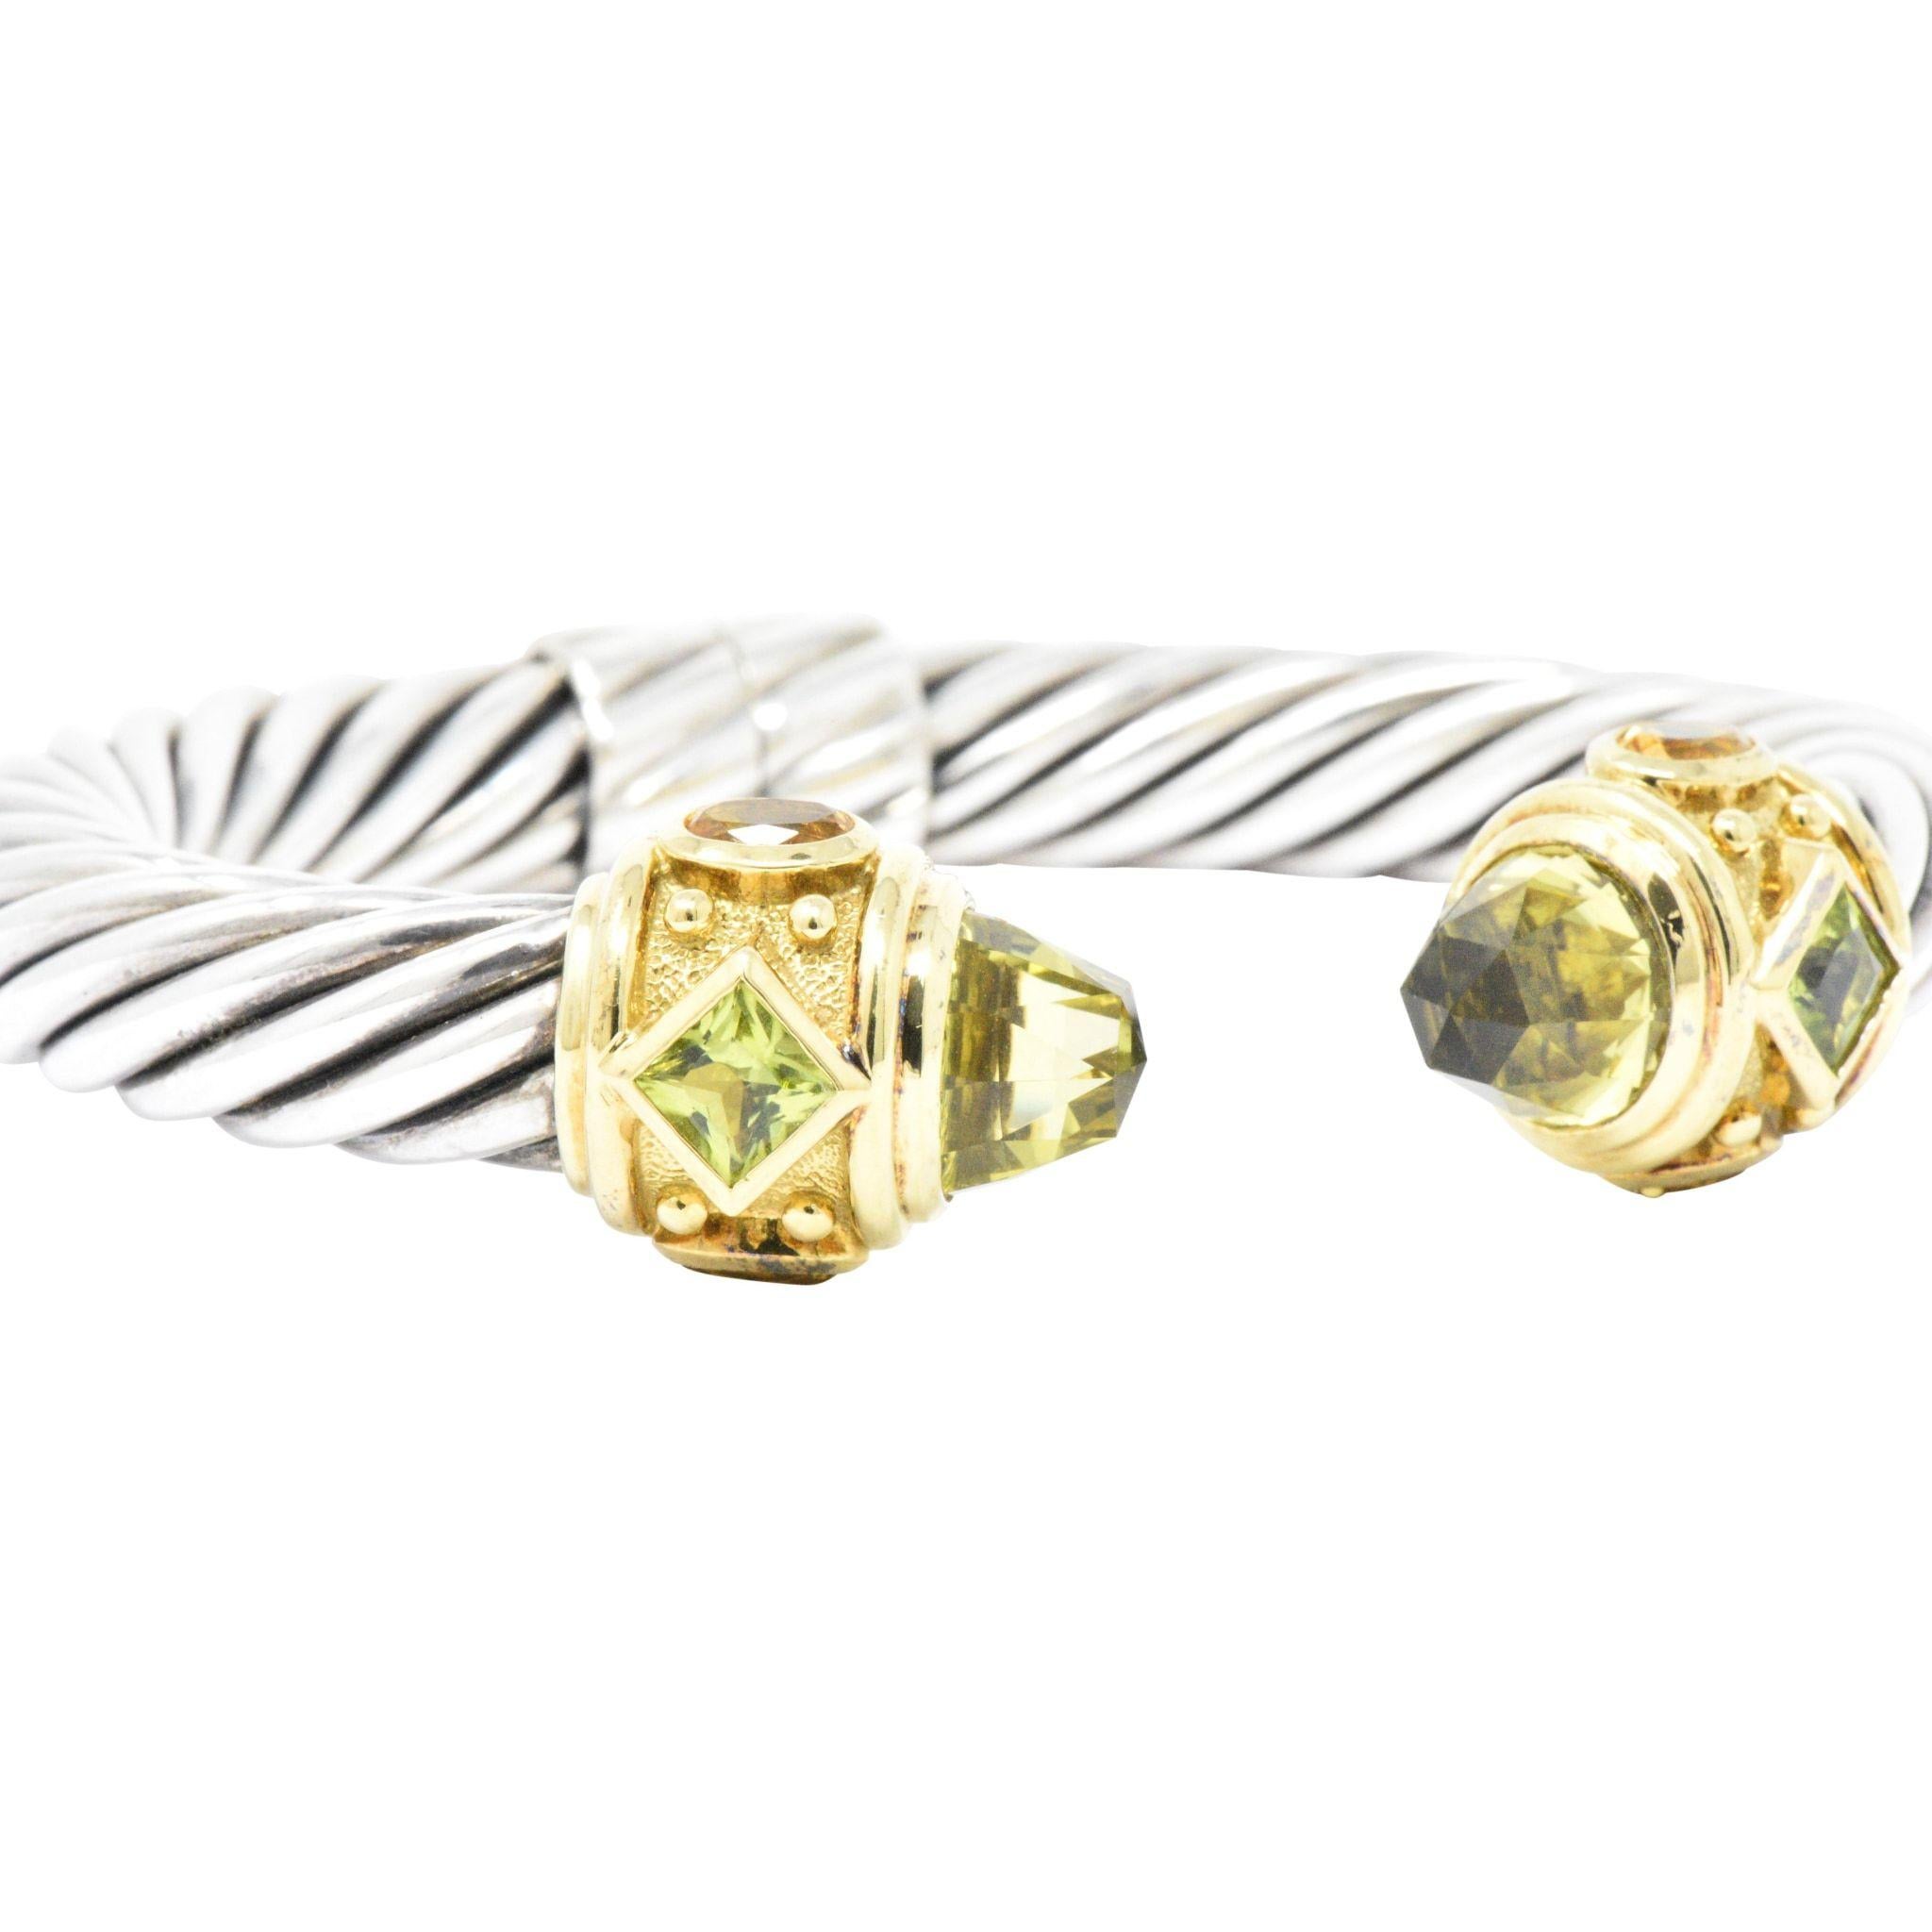 Twisted sterling silver completed by 18K gold with square cut peridot, oval cut citrine, and faceted lemon quartz terminals
The stones are all bezel set with polished and textured gold detail
Hinged for easy application or removal
Contemporary